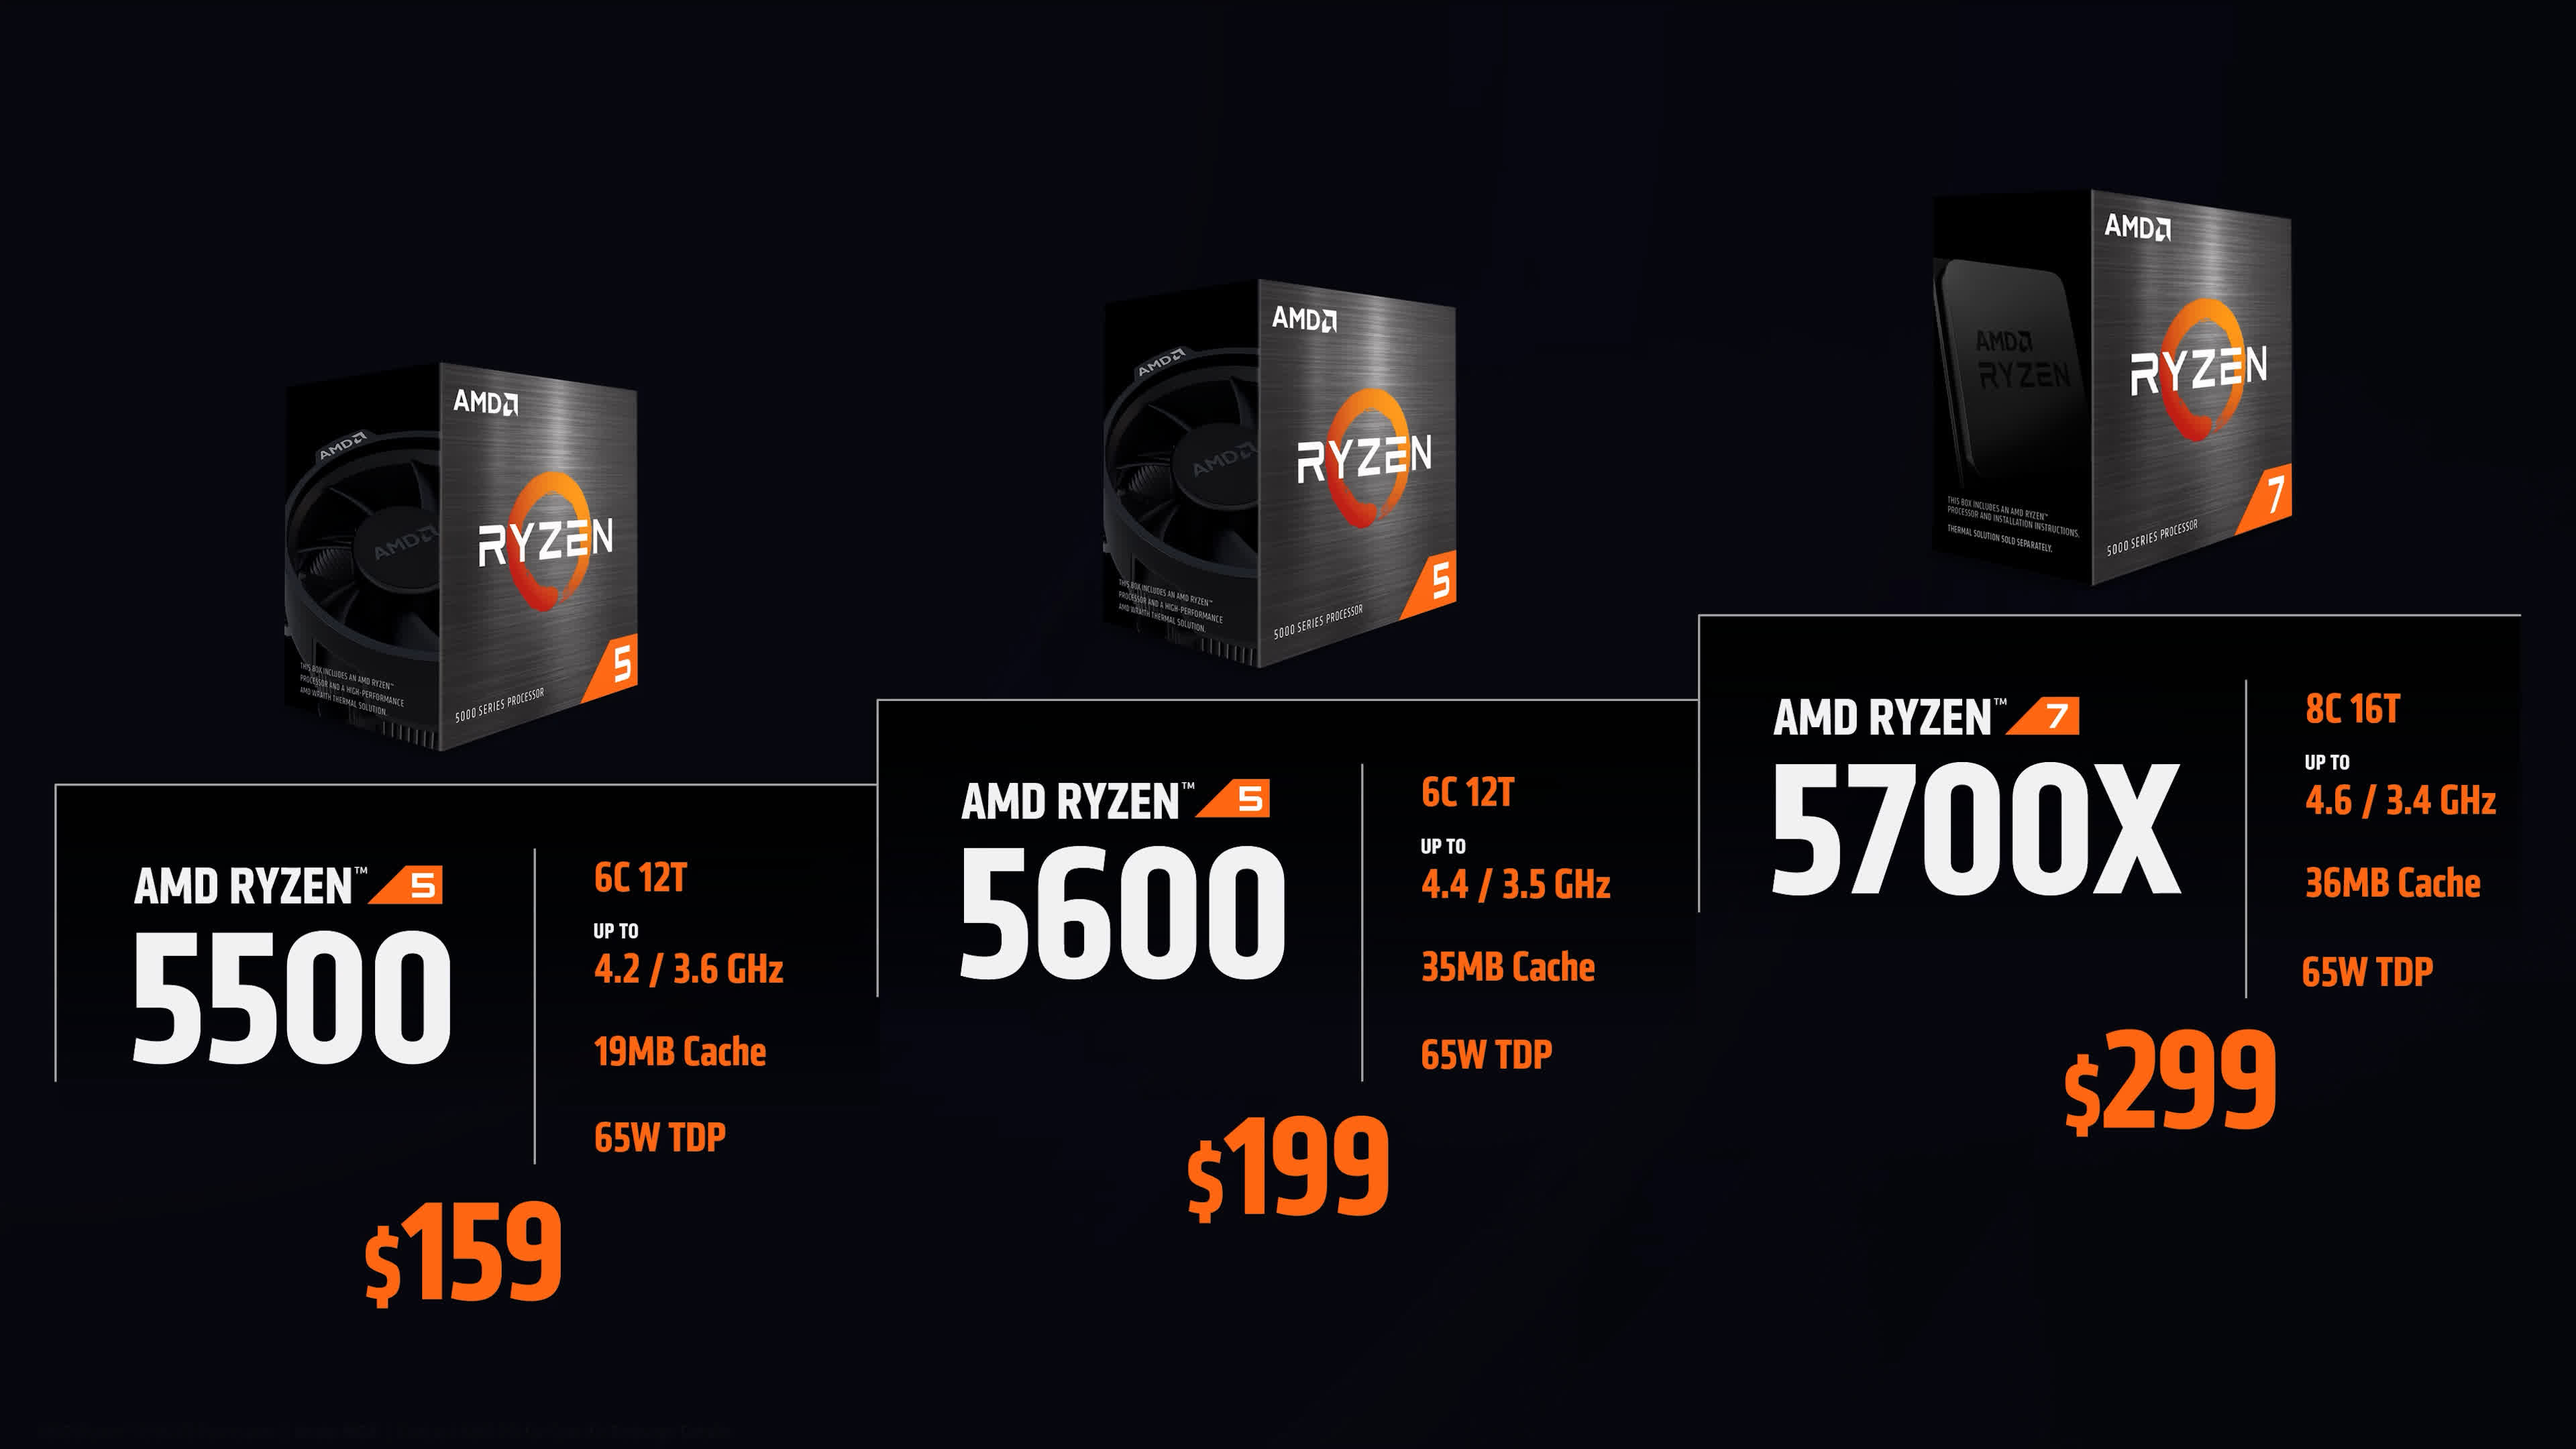 AMD launches 7 new Ryzen CPUs: Ryzen 5 5600 is official at $200, plus more budget parts